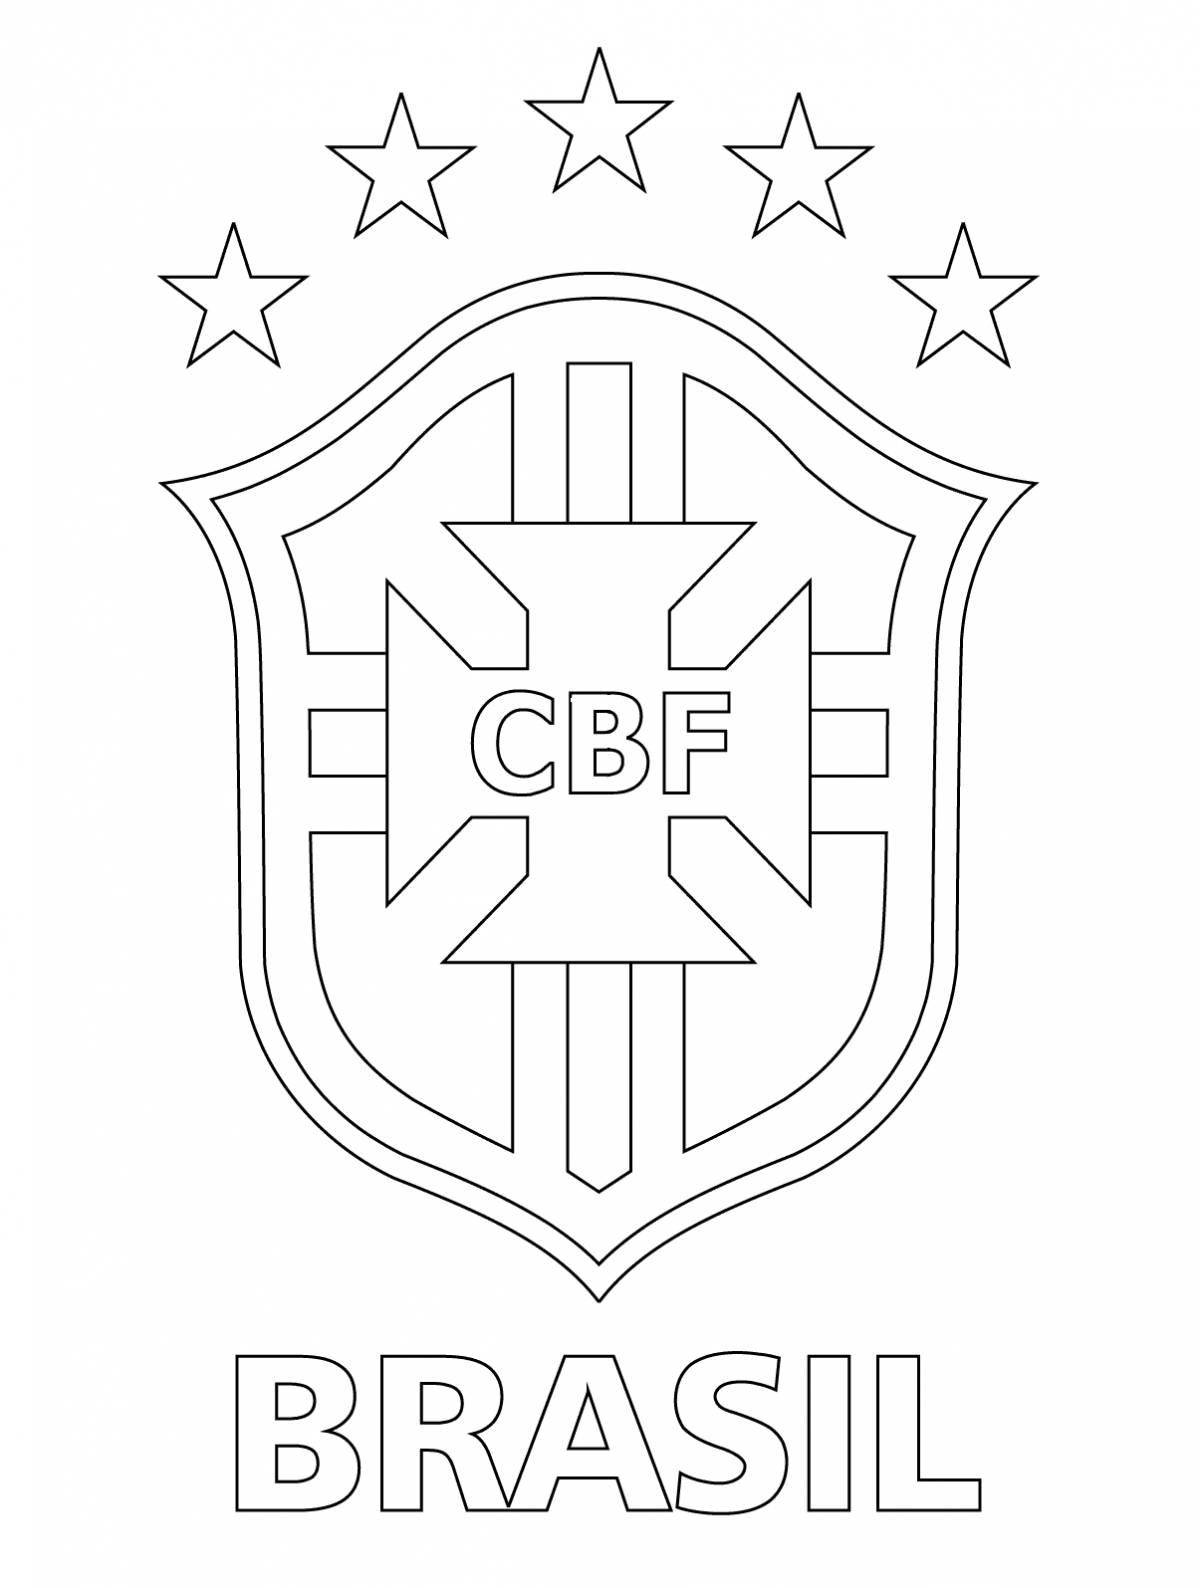 Exciting psg emblem coloring page